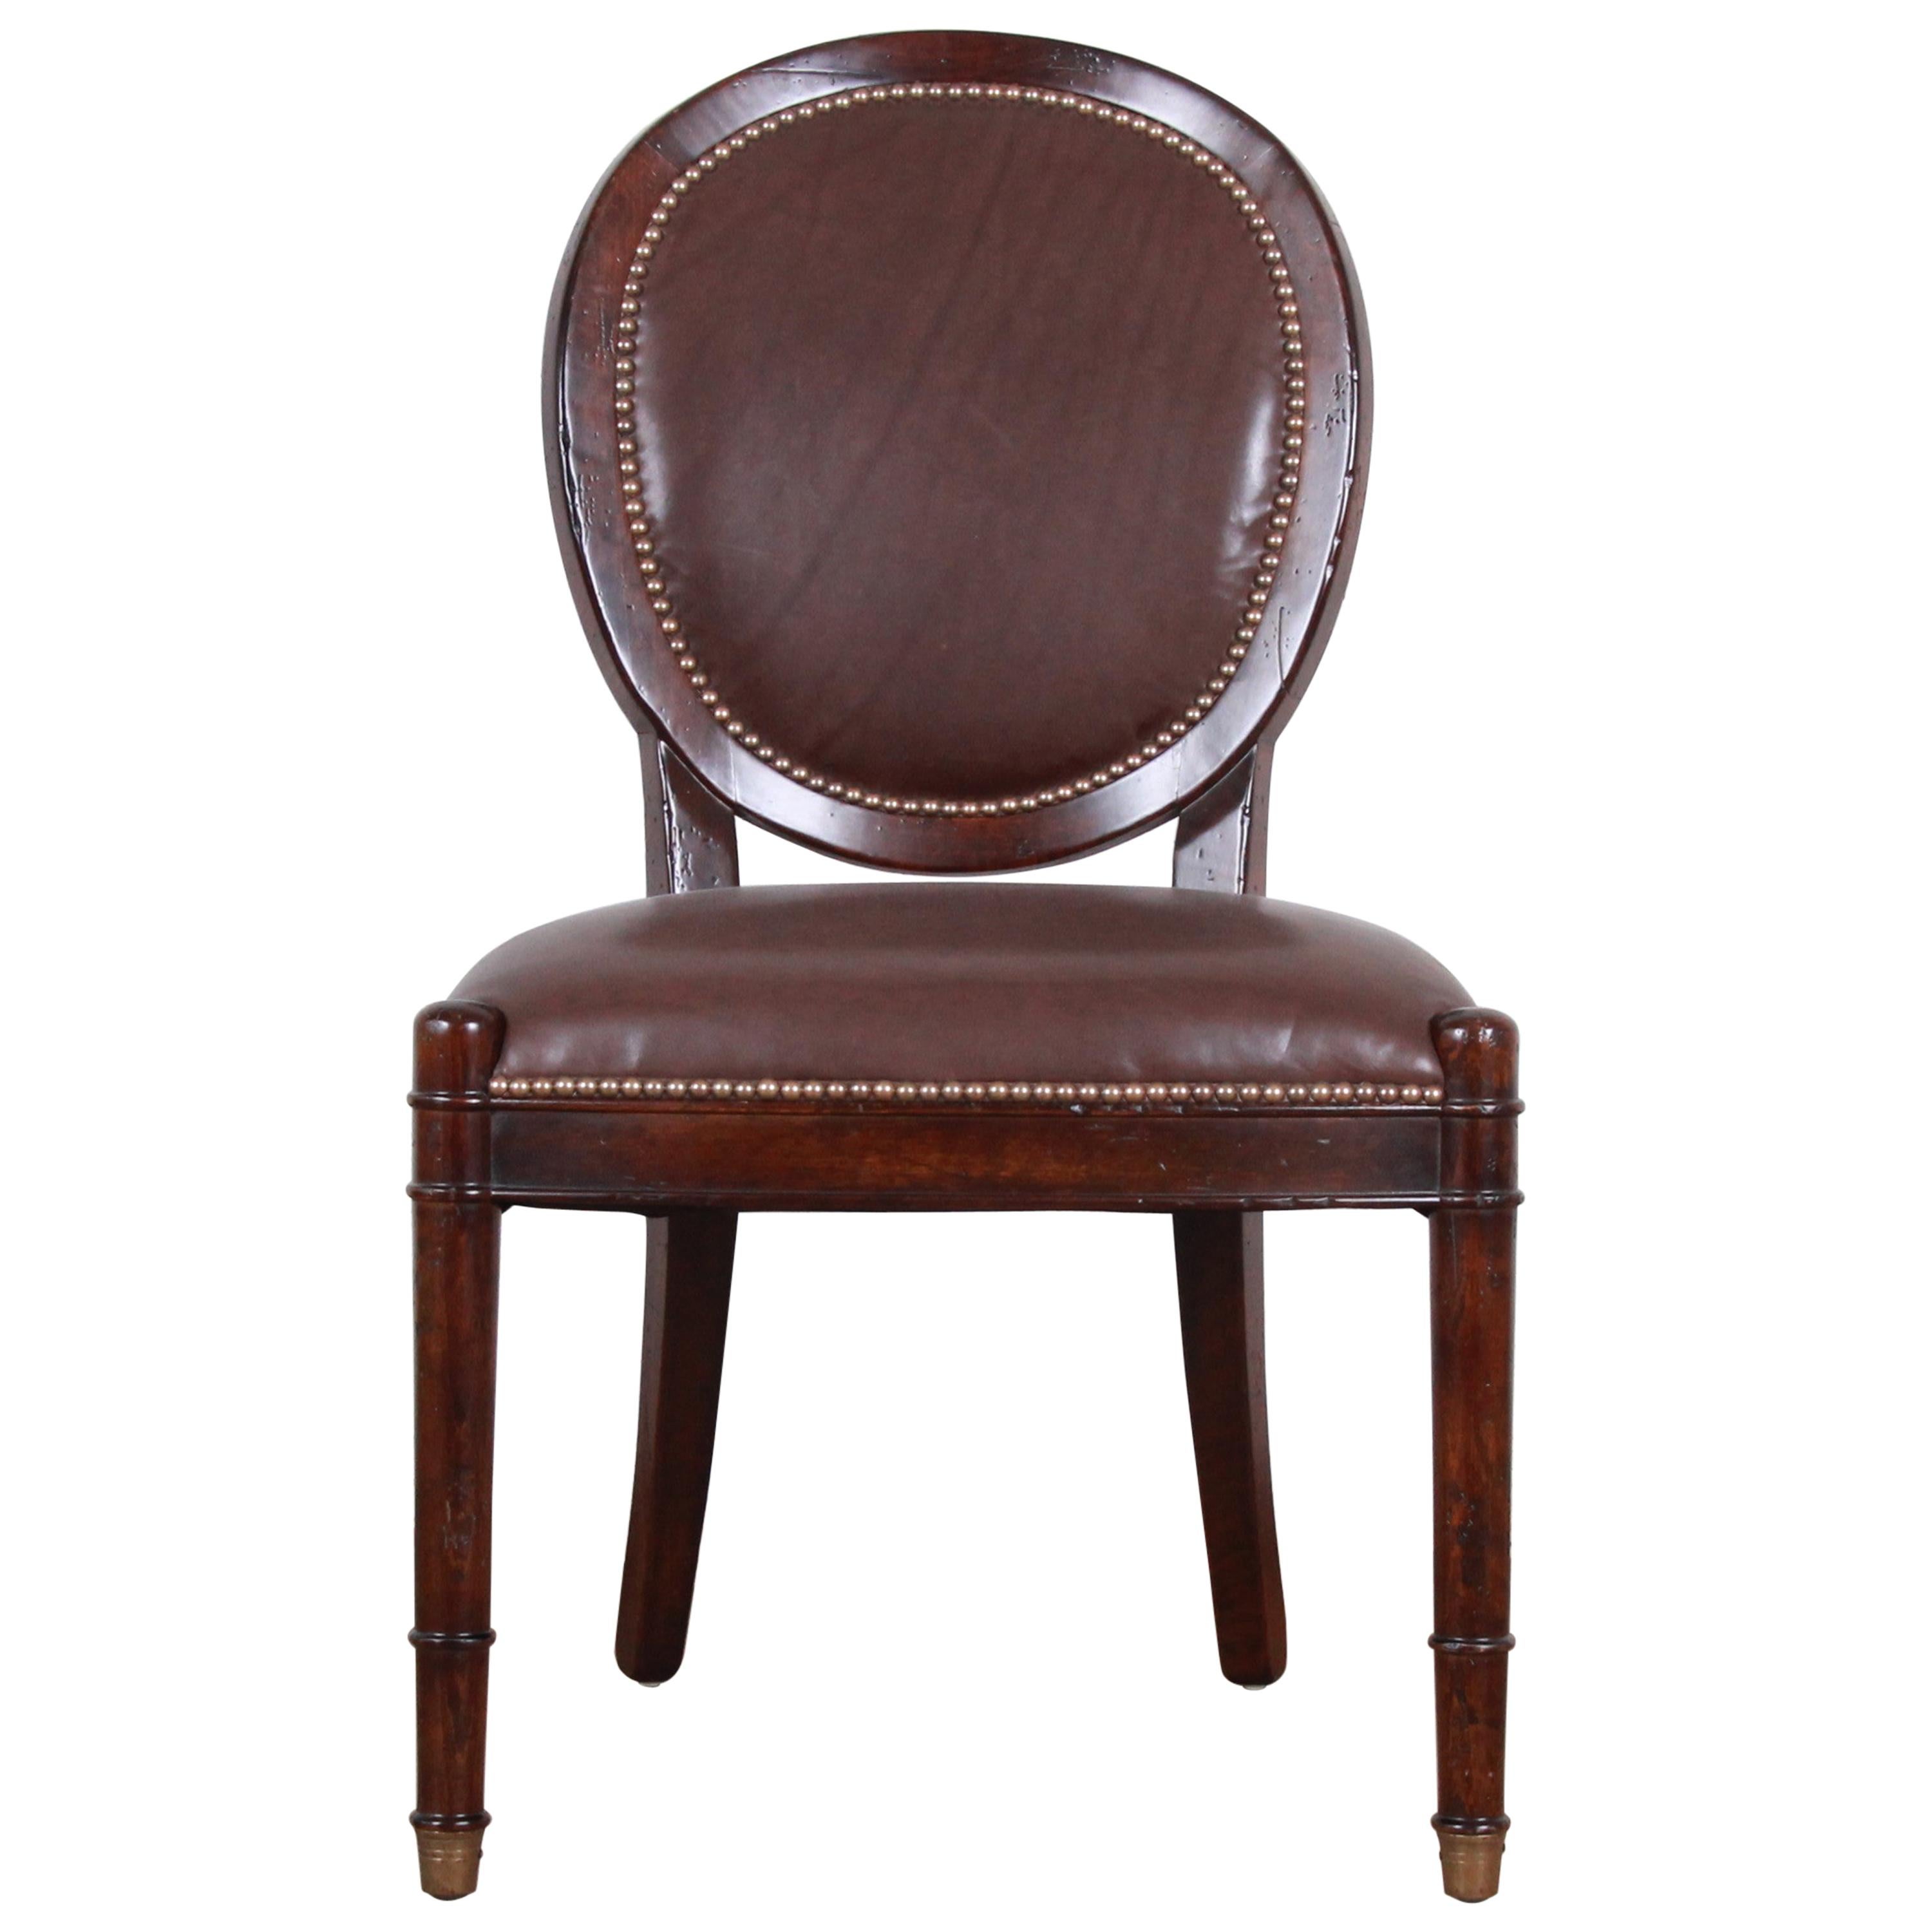 Baker Furniture Milling Road Collection Studded Leather Balloon Back Side Chair